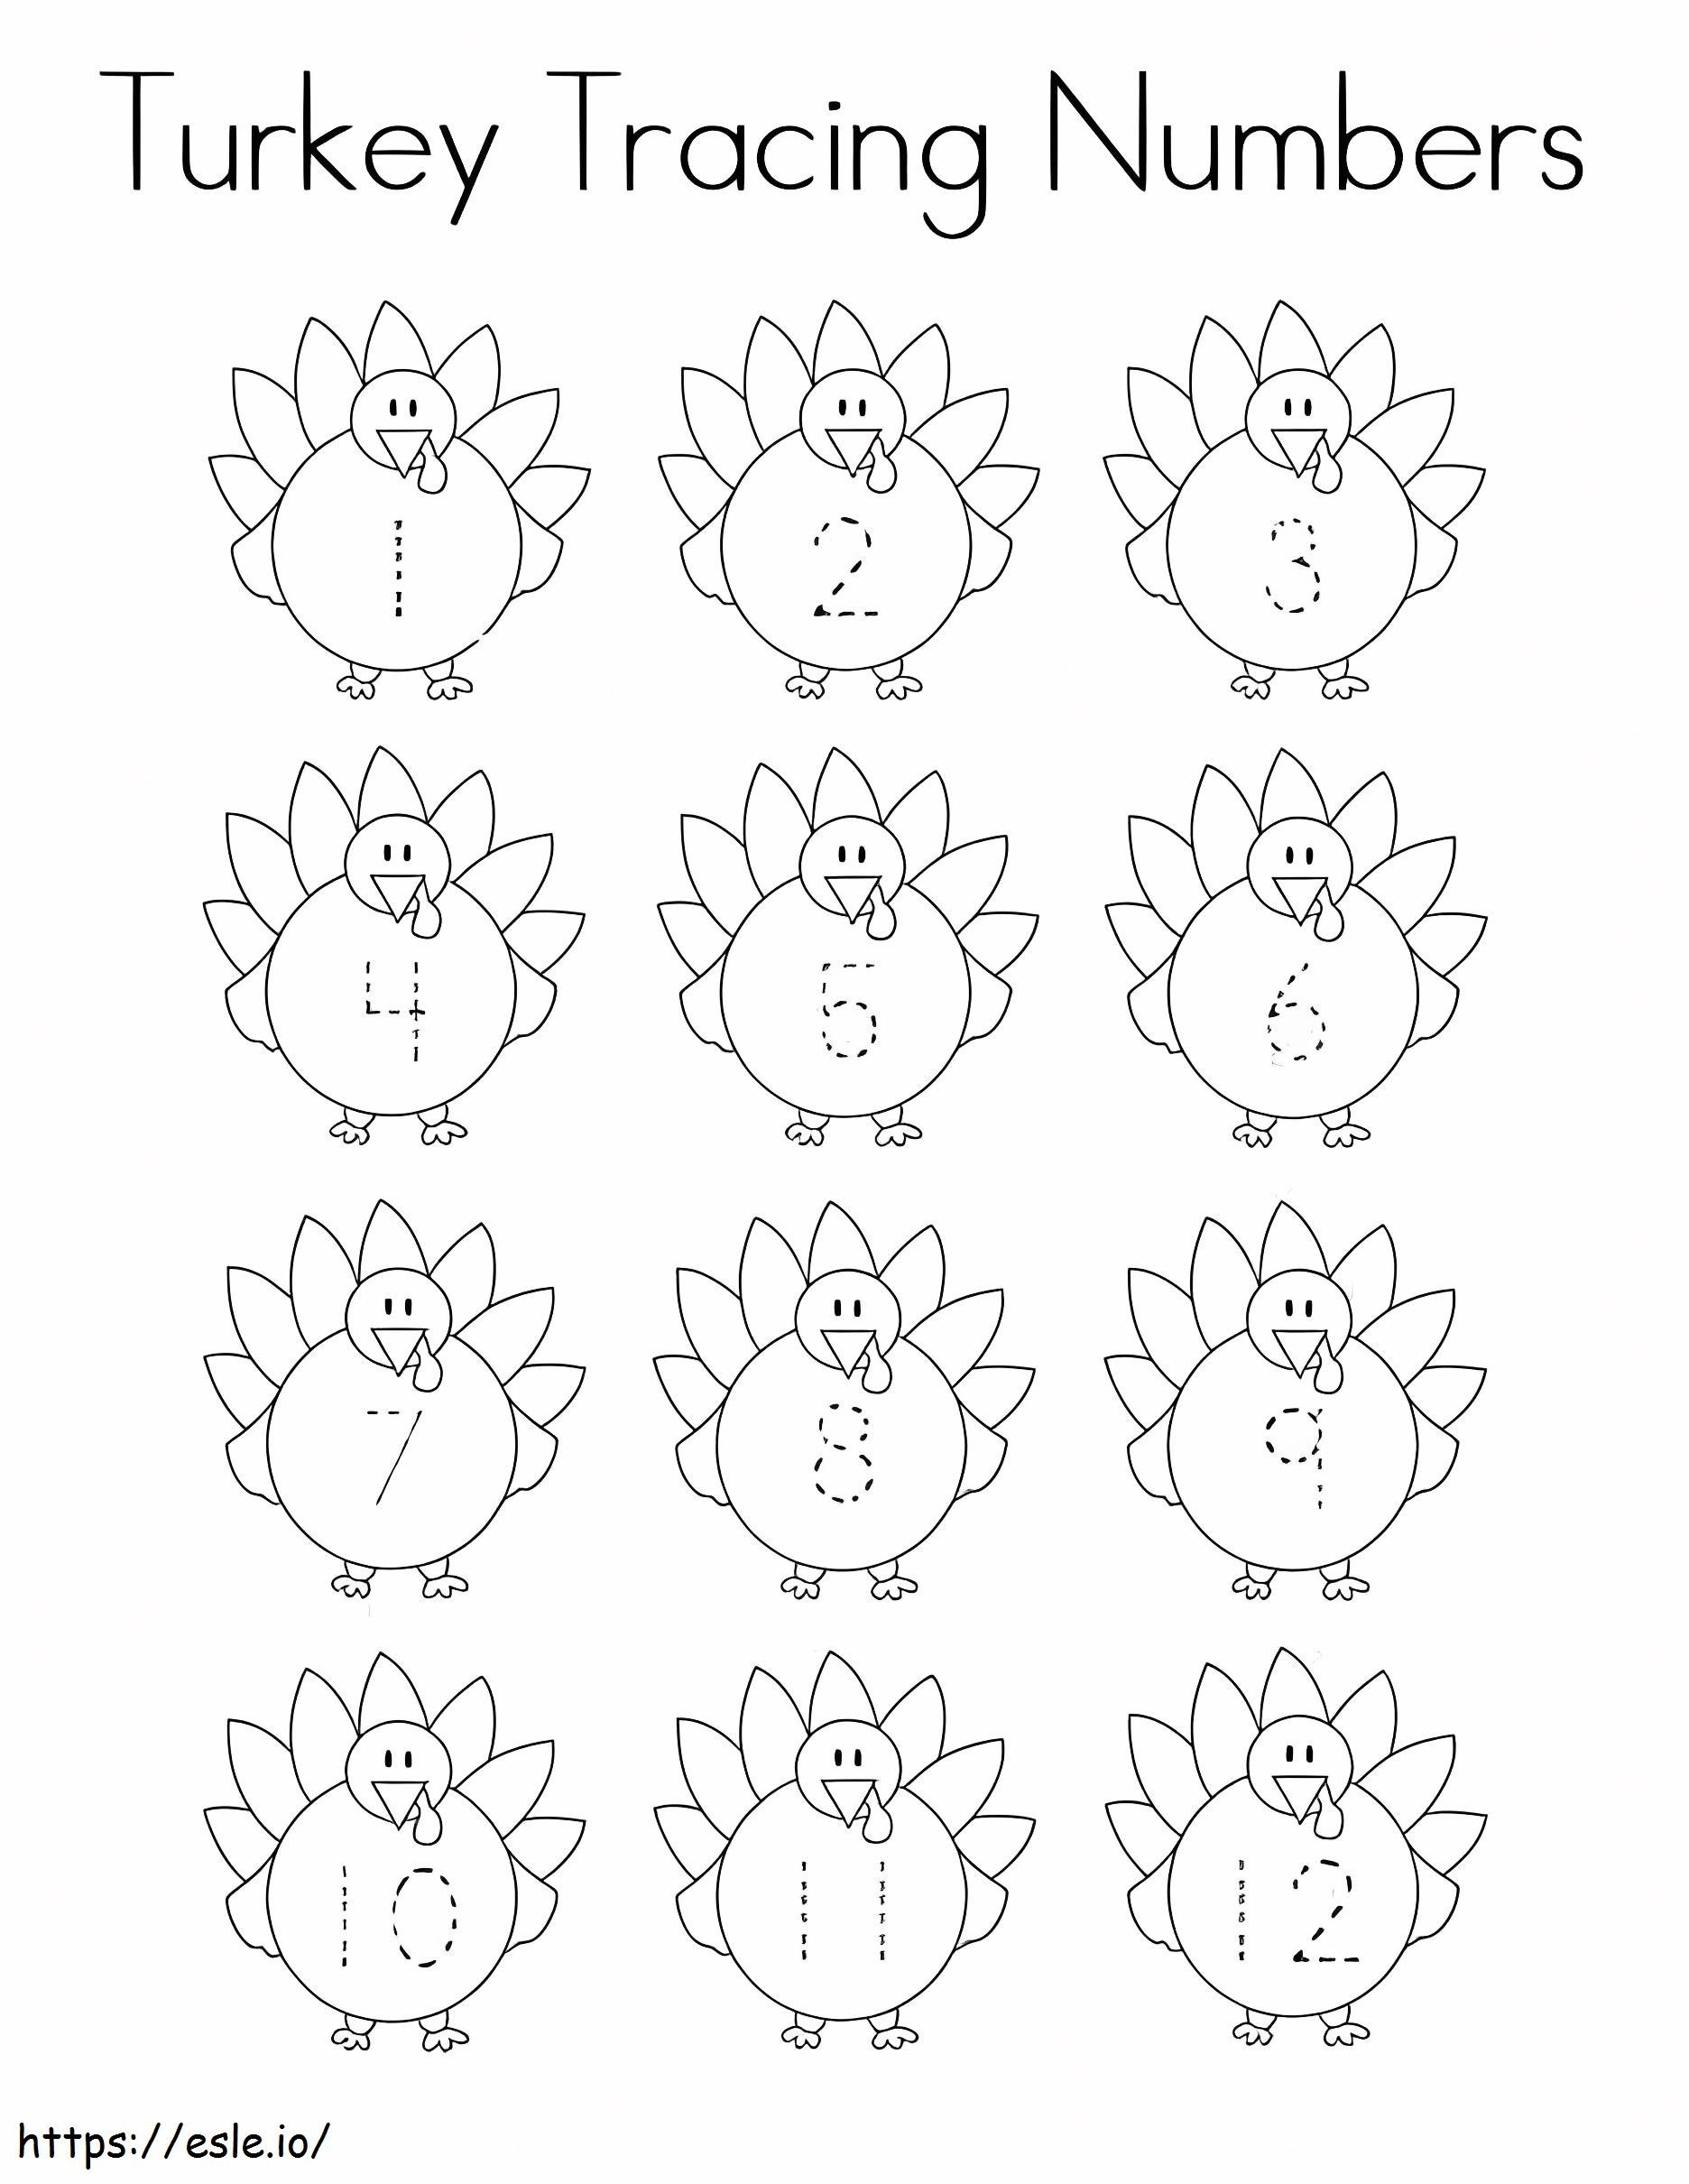 Turkey Tracing Numbers coloring page